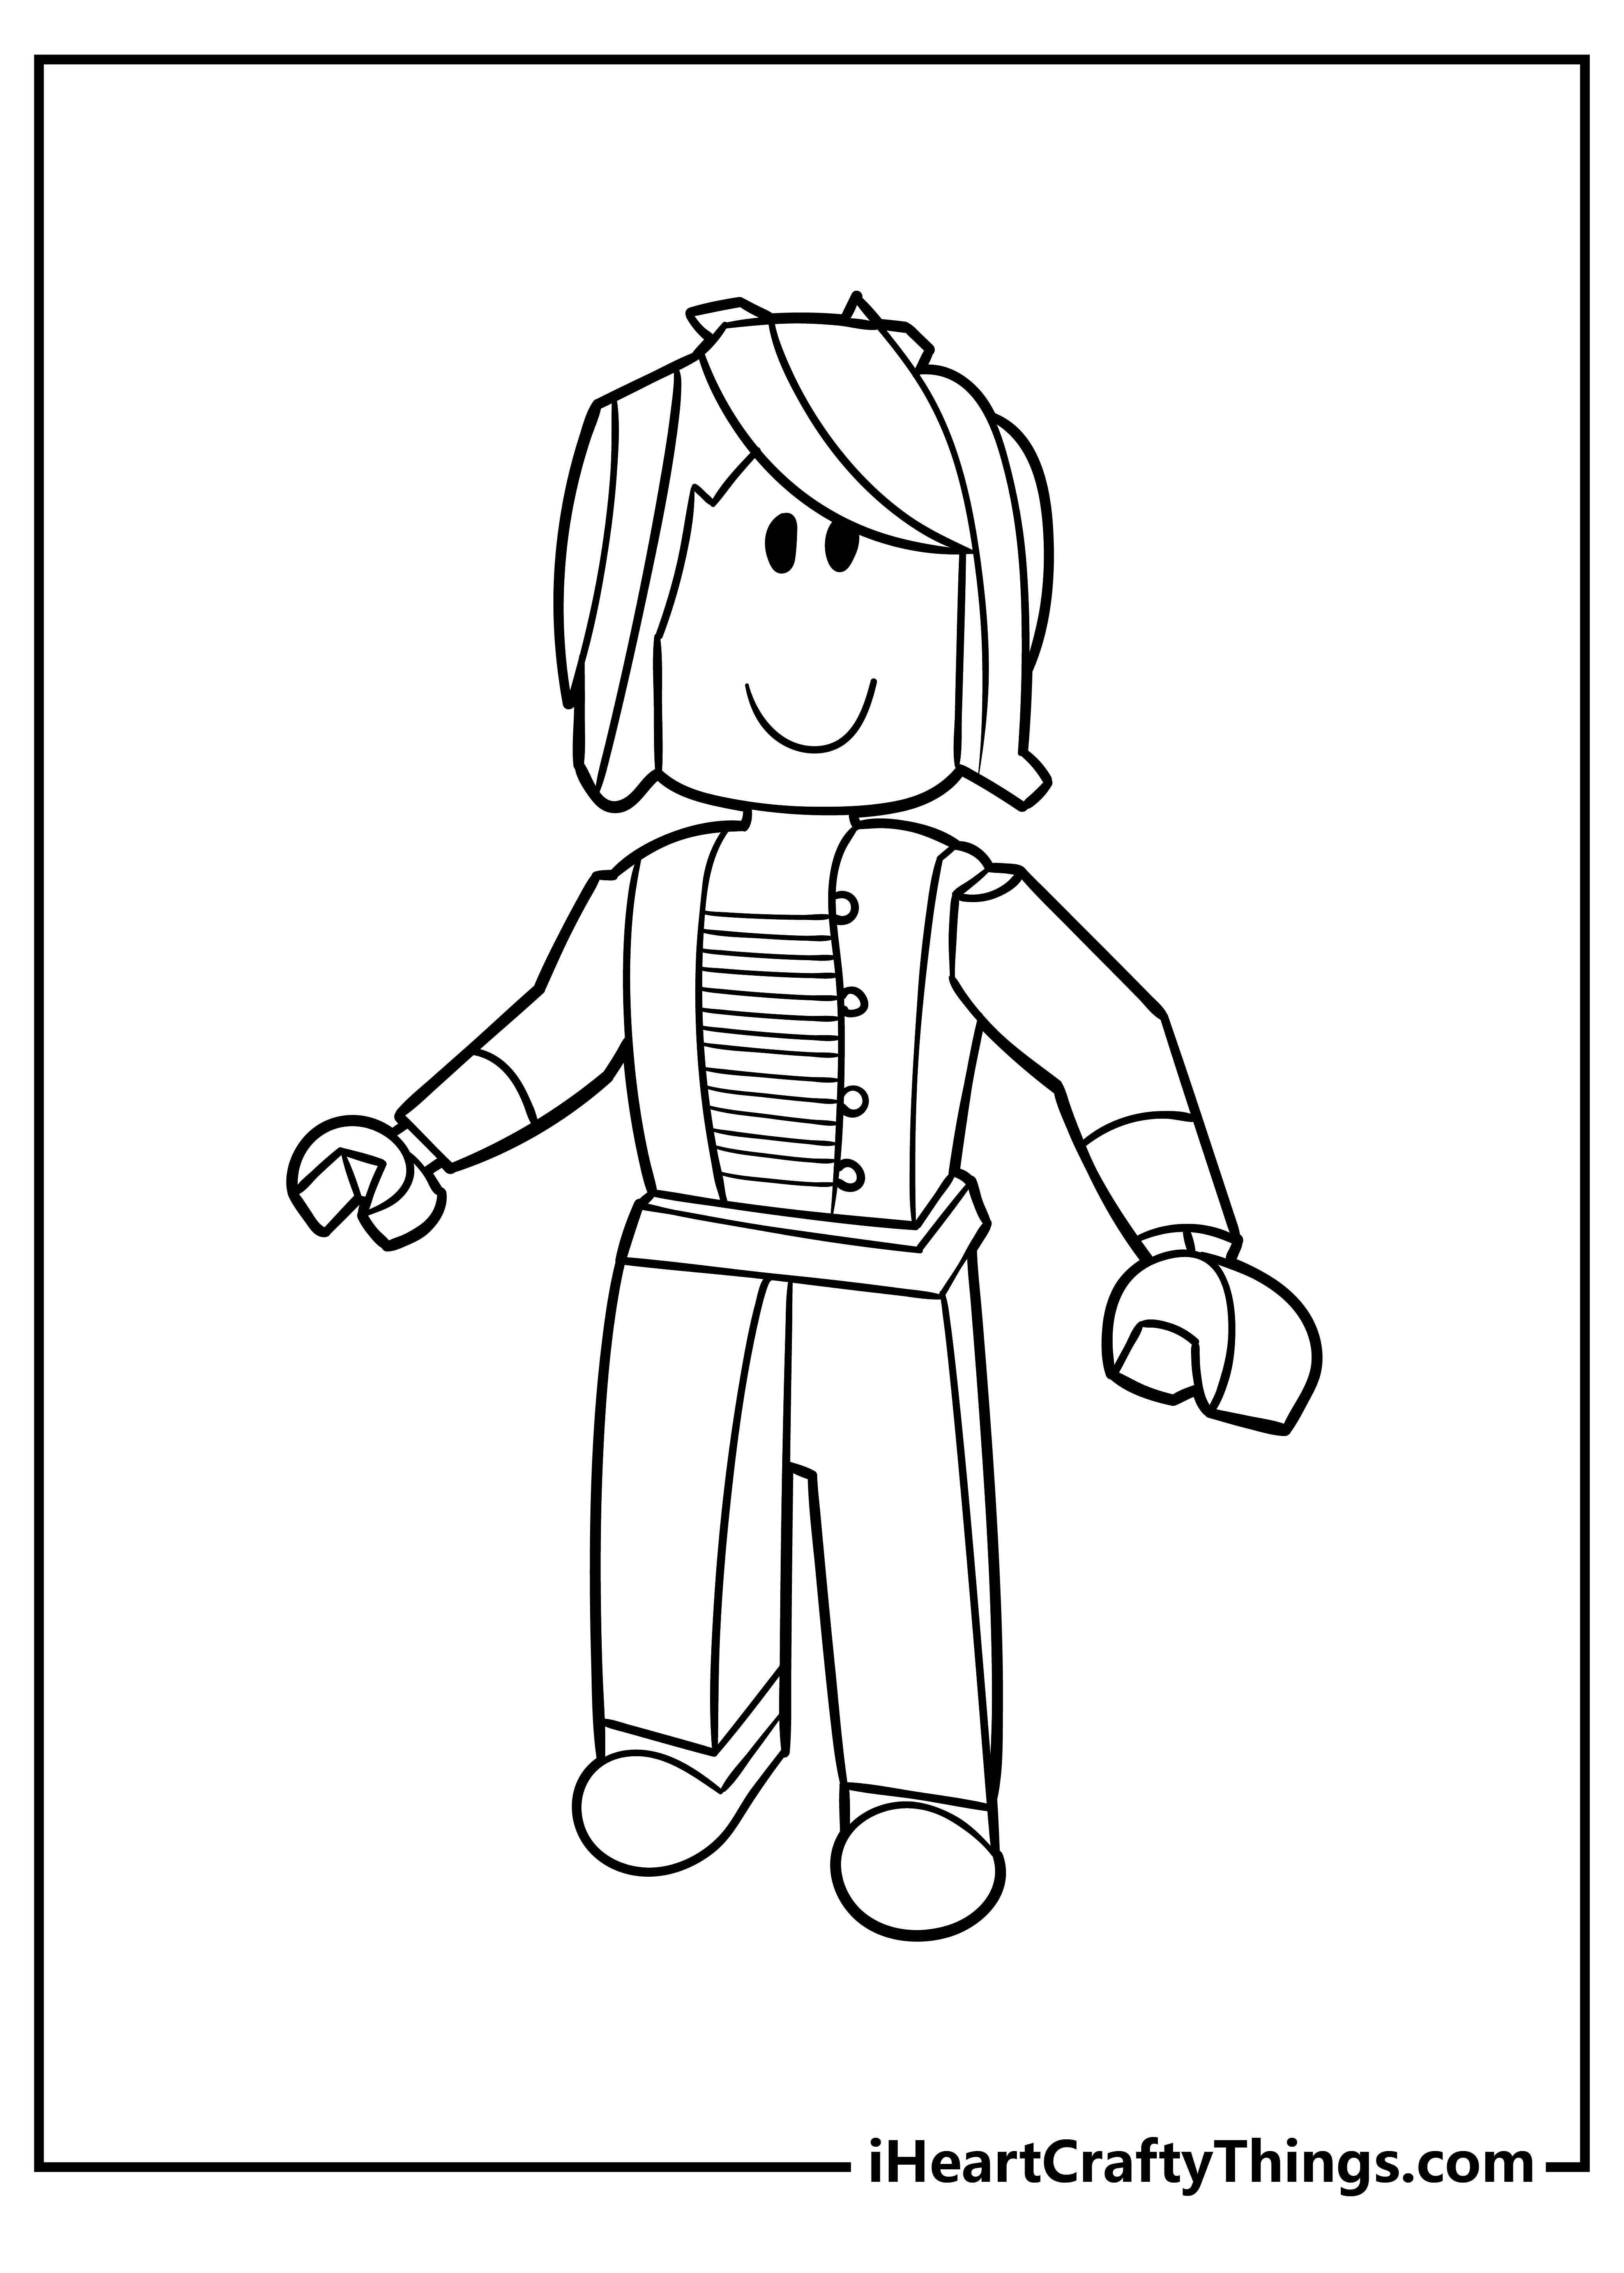 Roblox Coloring Pages for preschoolers free printable